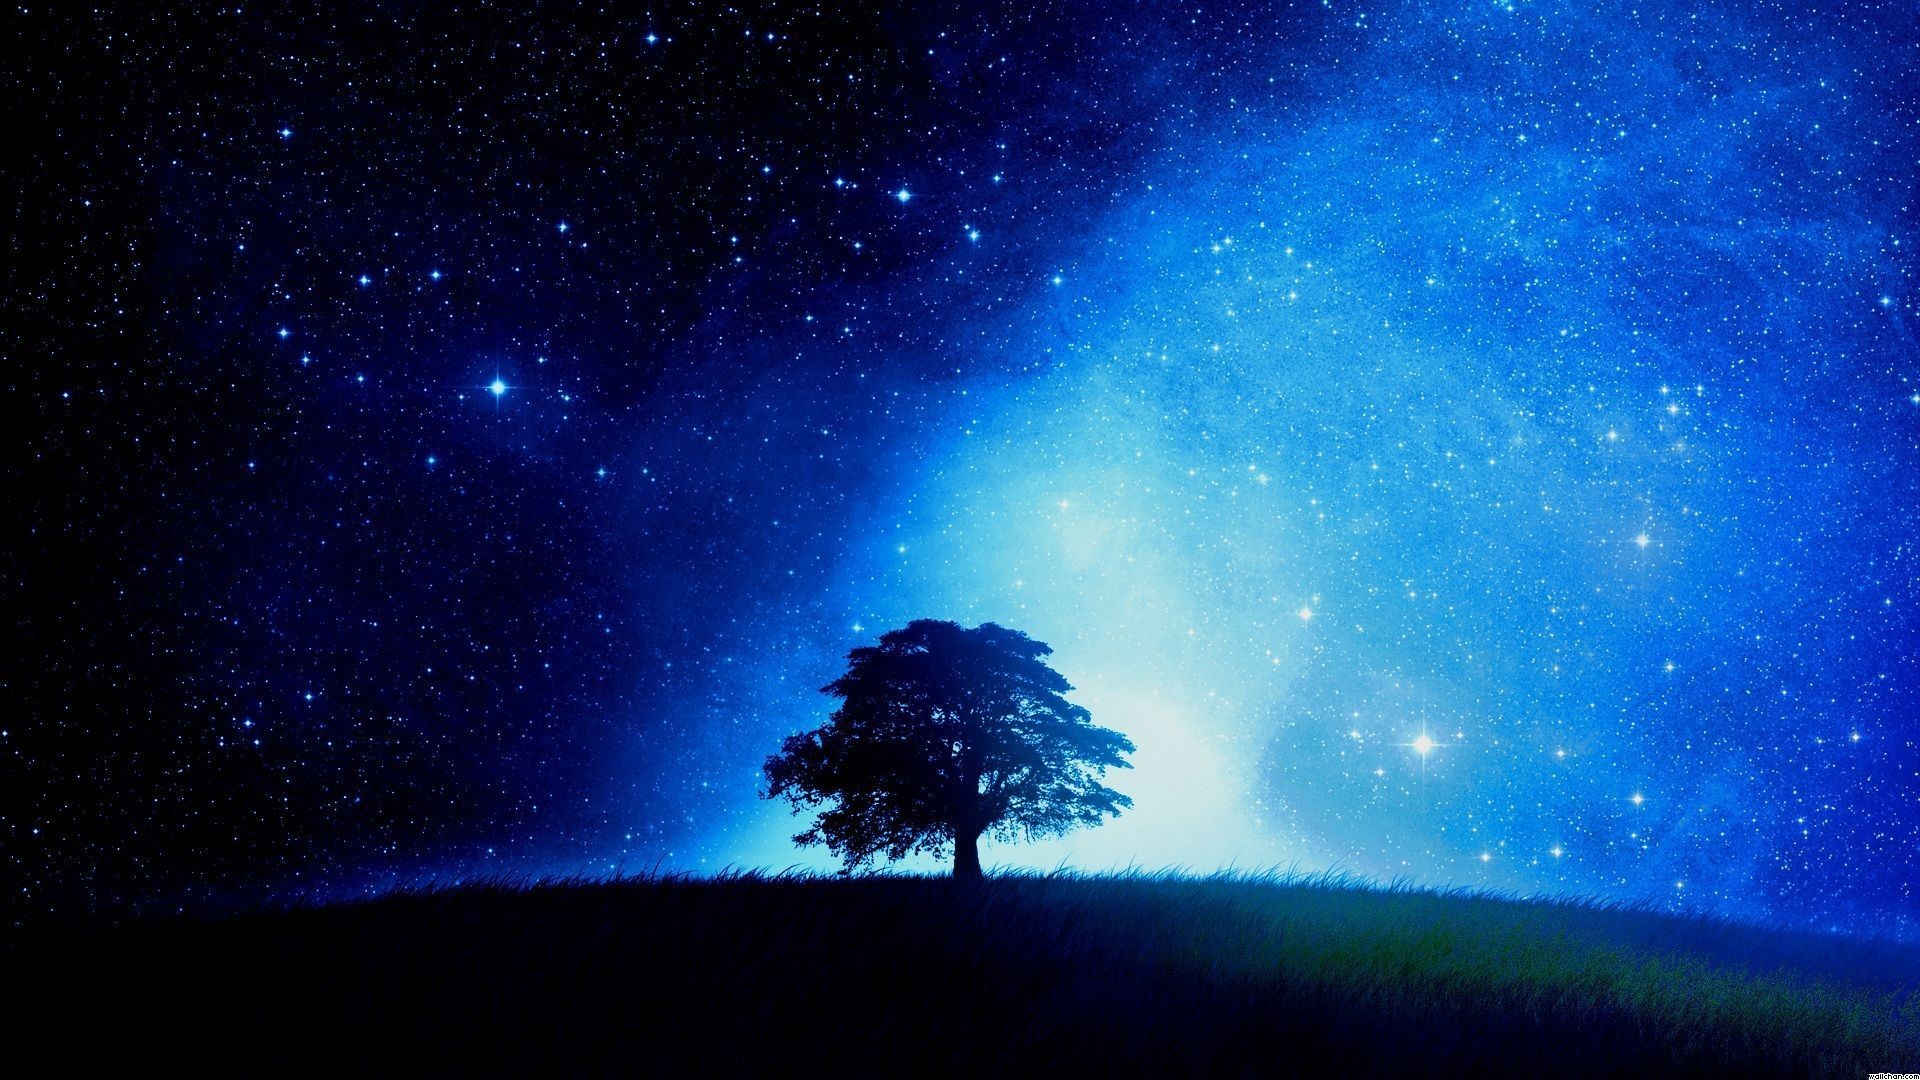 Night Sky Wallpaper For Free Android Places to Visit Pinterest 19201080 Blue Night Sky